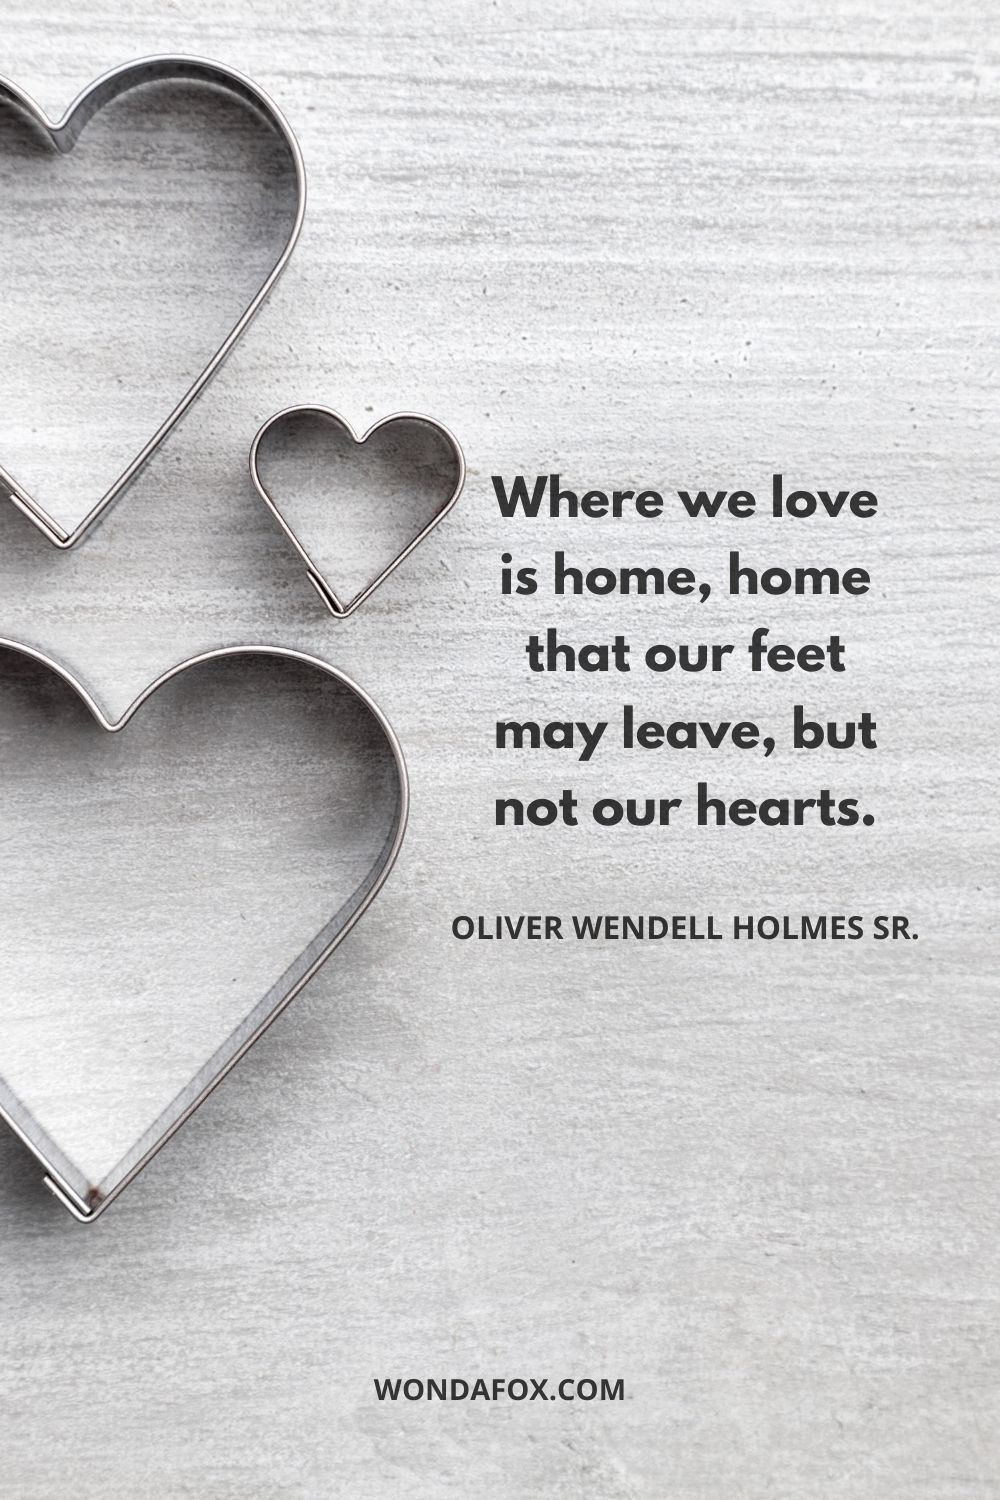 Where we love is home, home that our feet may leave, but not our hearts.